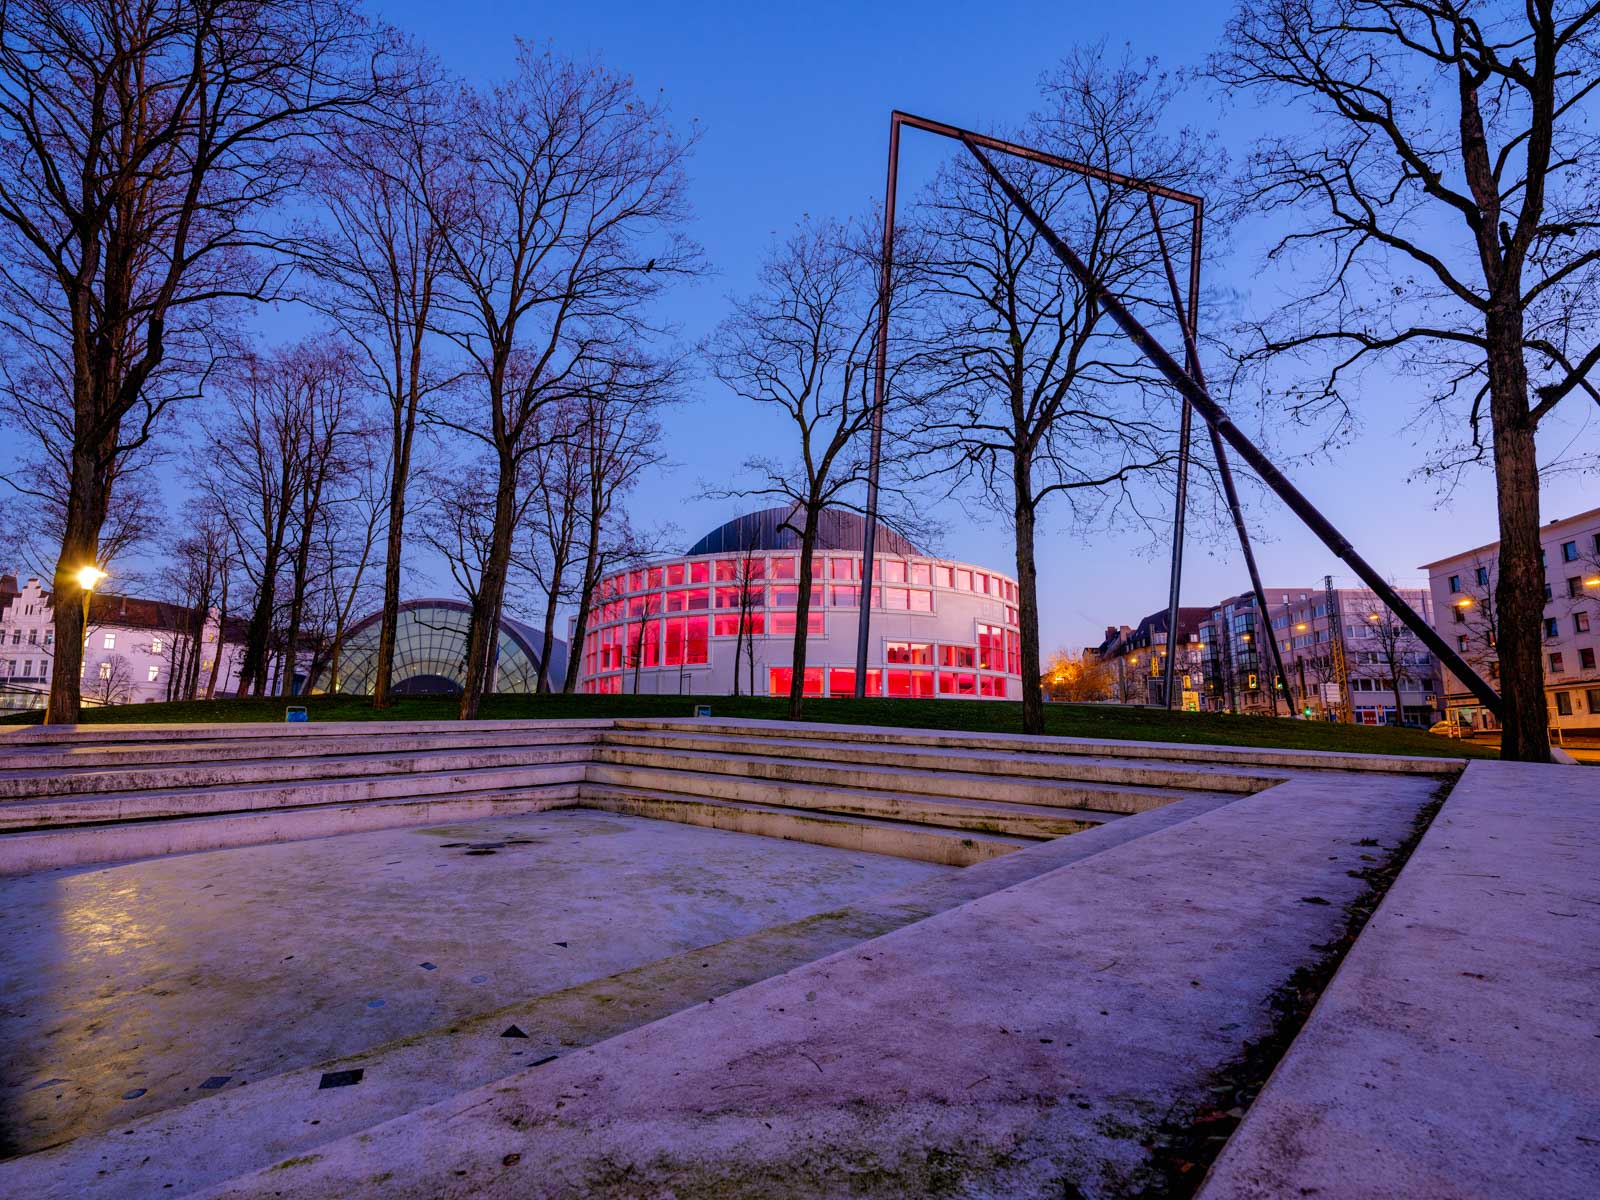 Conference hall (Stadthalle) and - from the end of December 2020, the COVID 19 Pandemic Vaccination Centre - illuminated in red (Bielefeld, Germany).